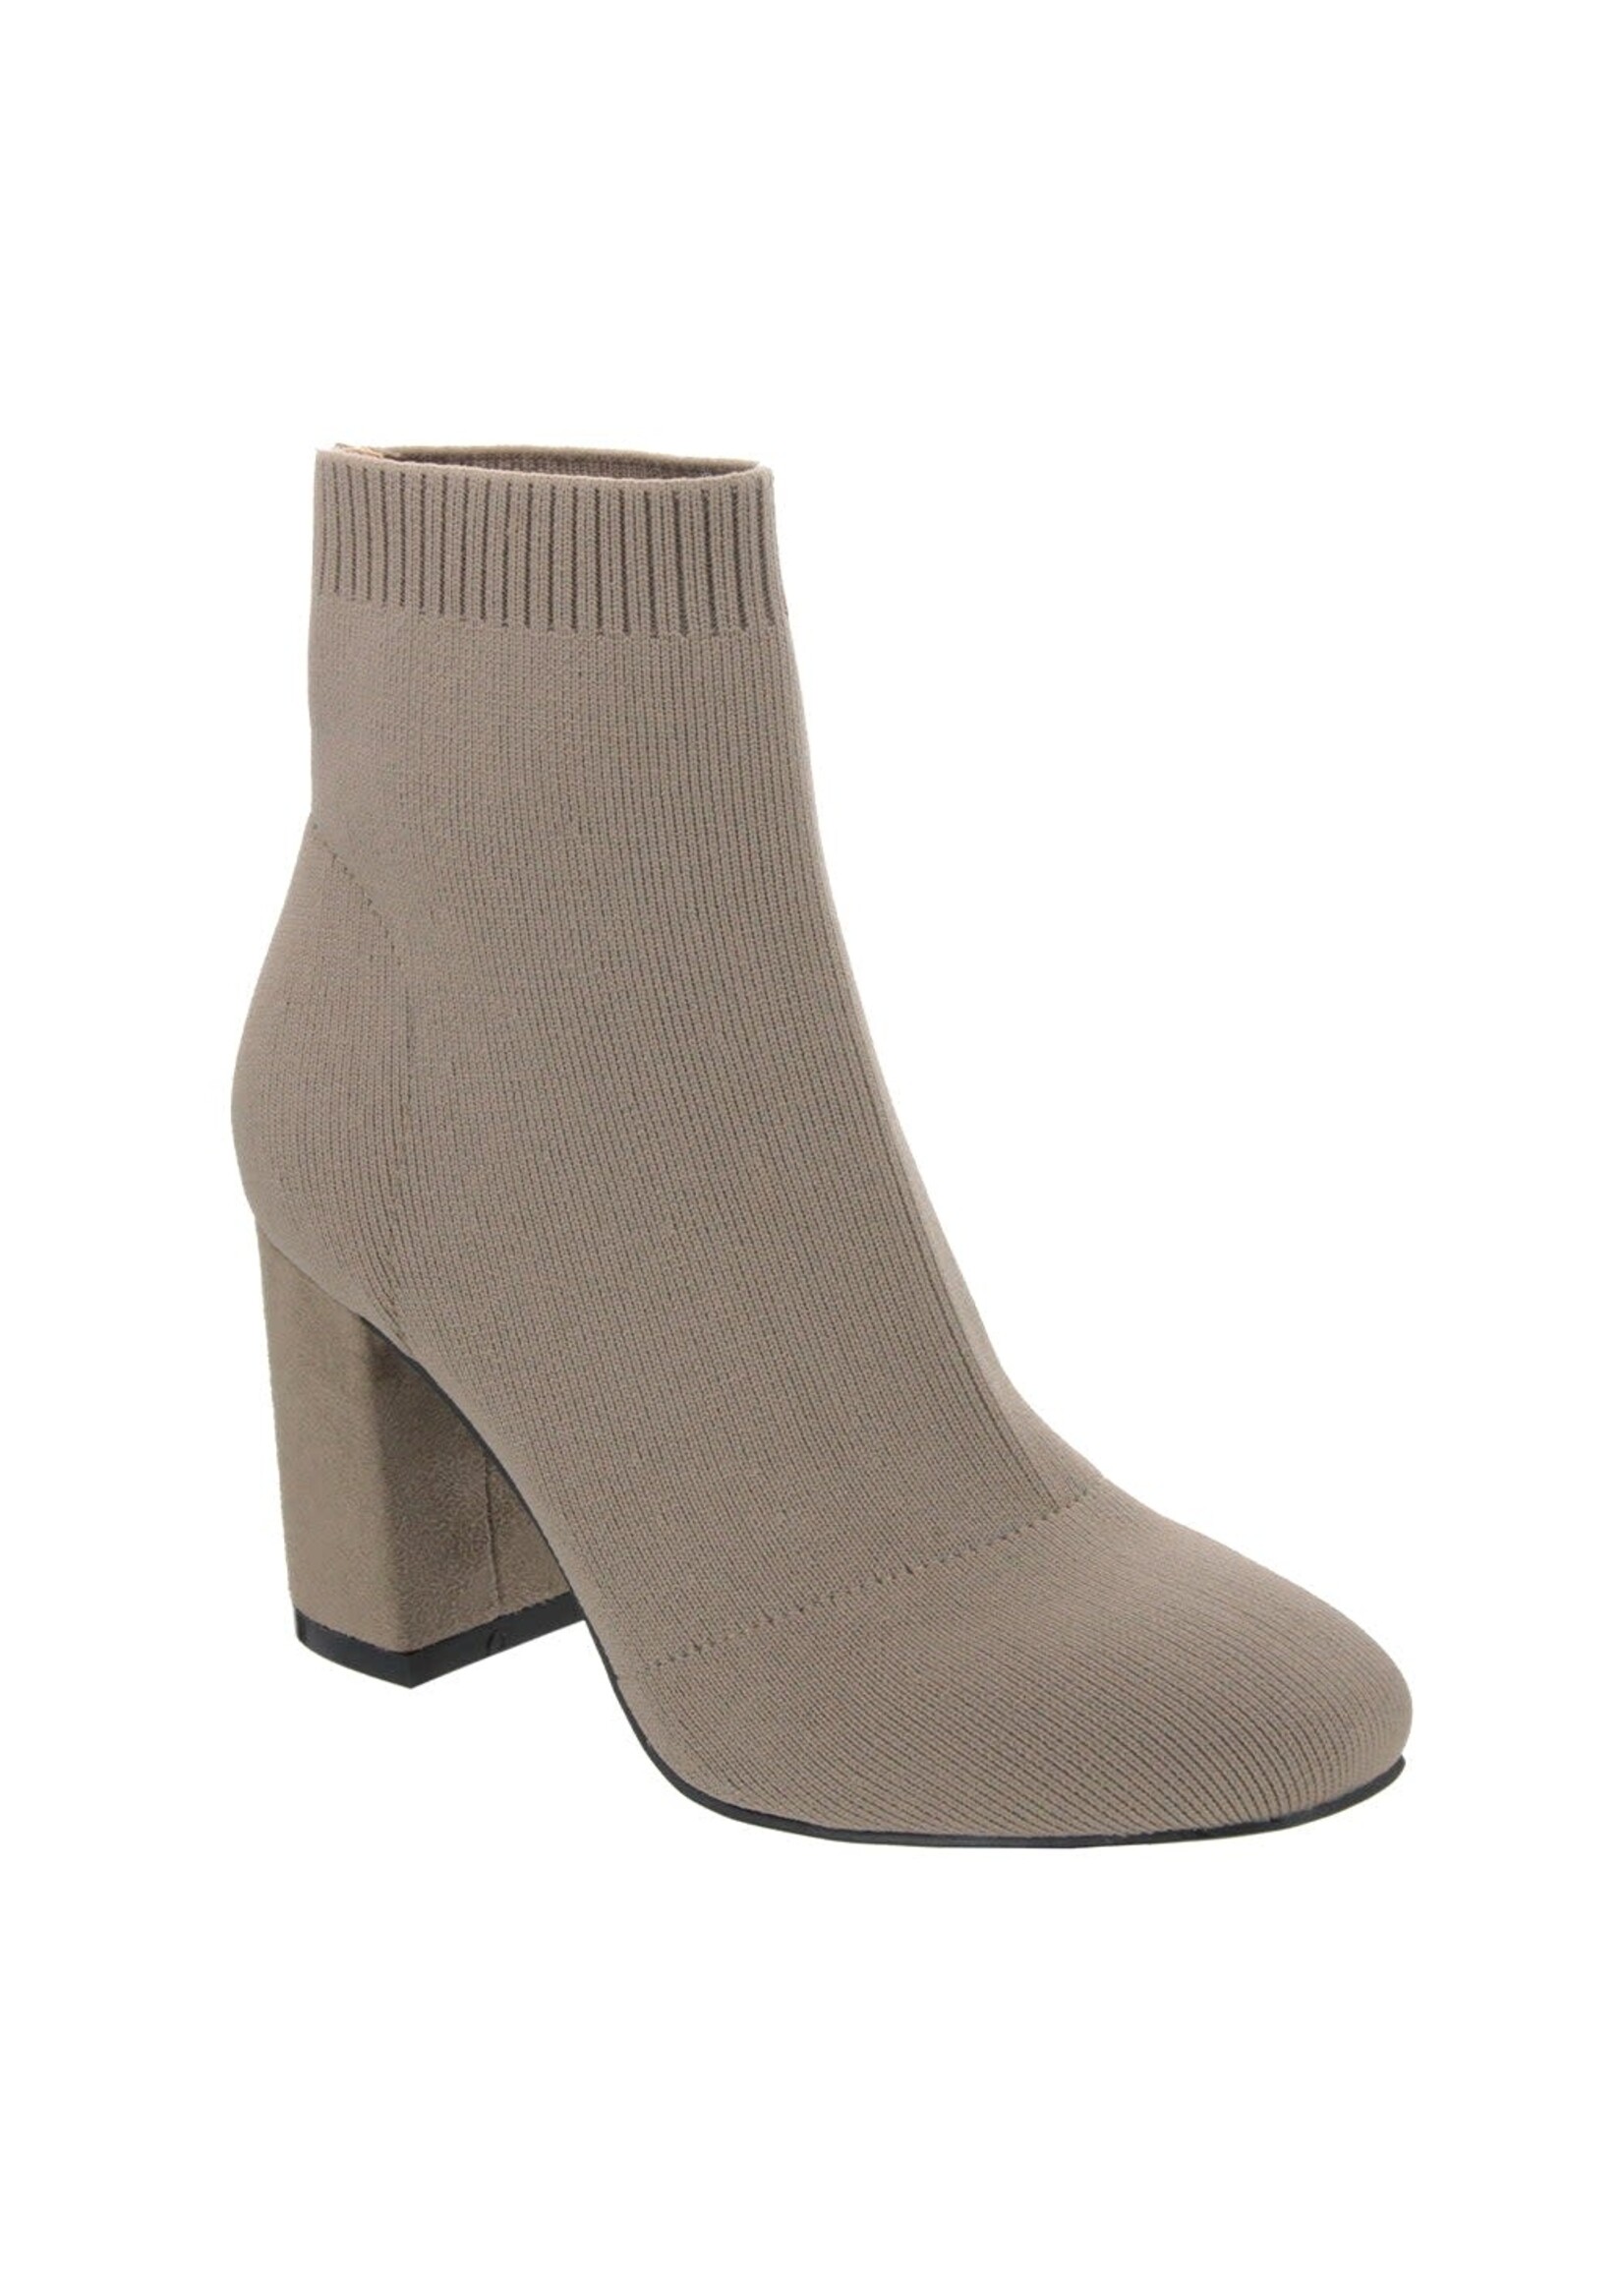 Mia Shoes Erika Dark Sand Fly Knit Boot by Mia 25% Off